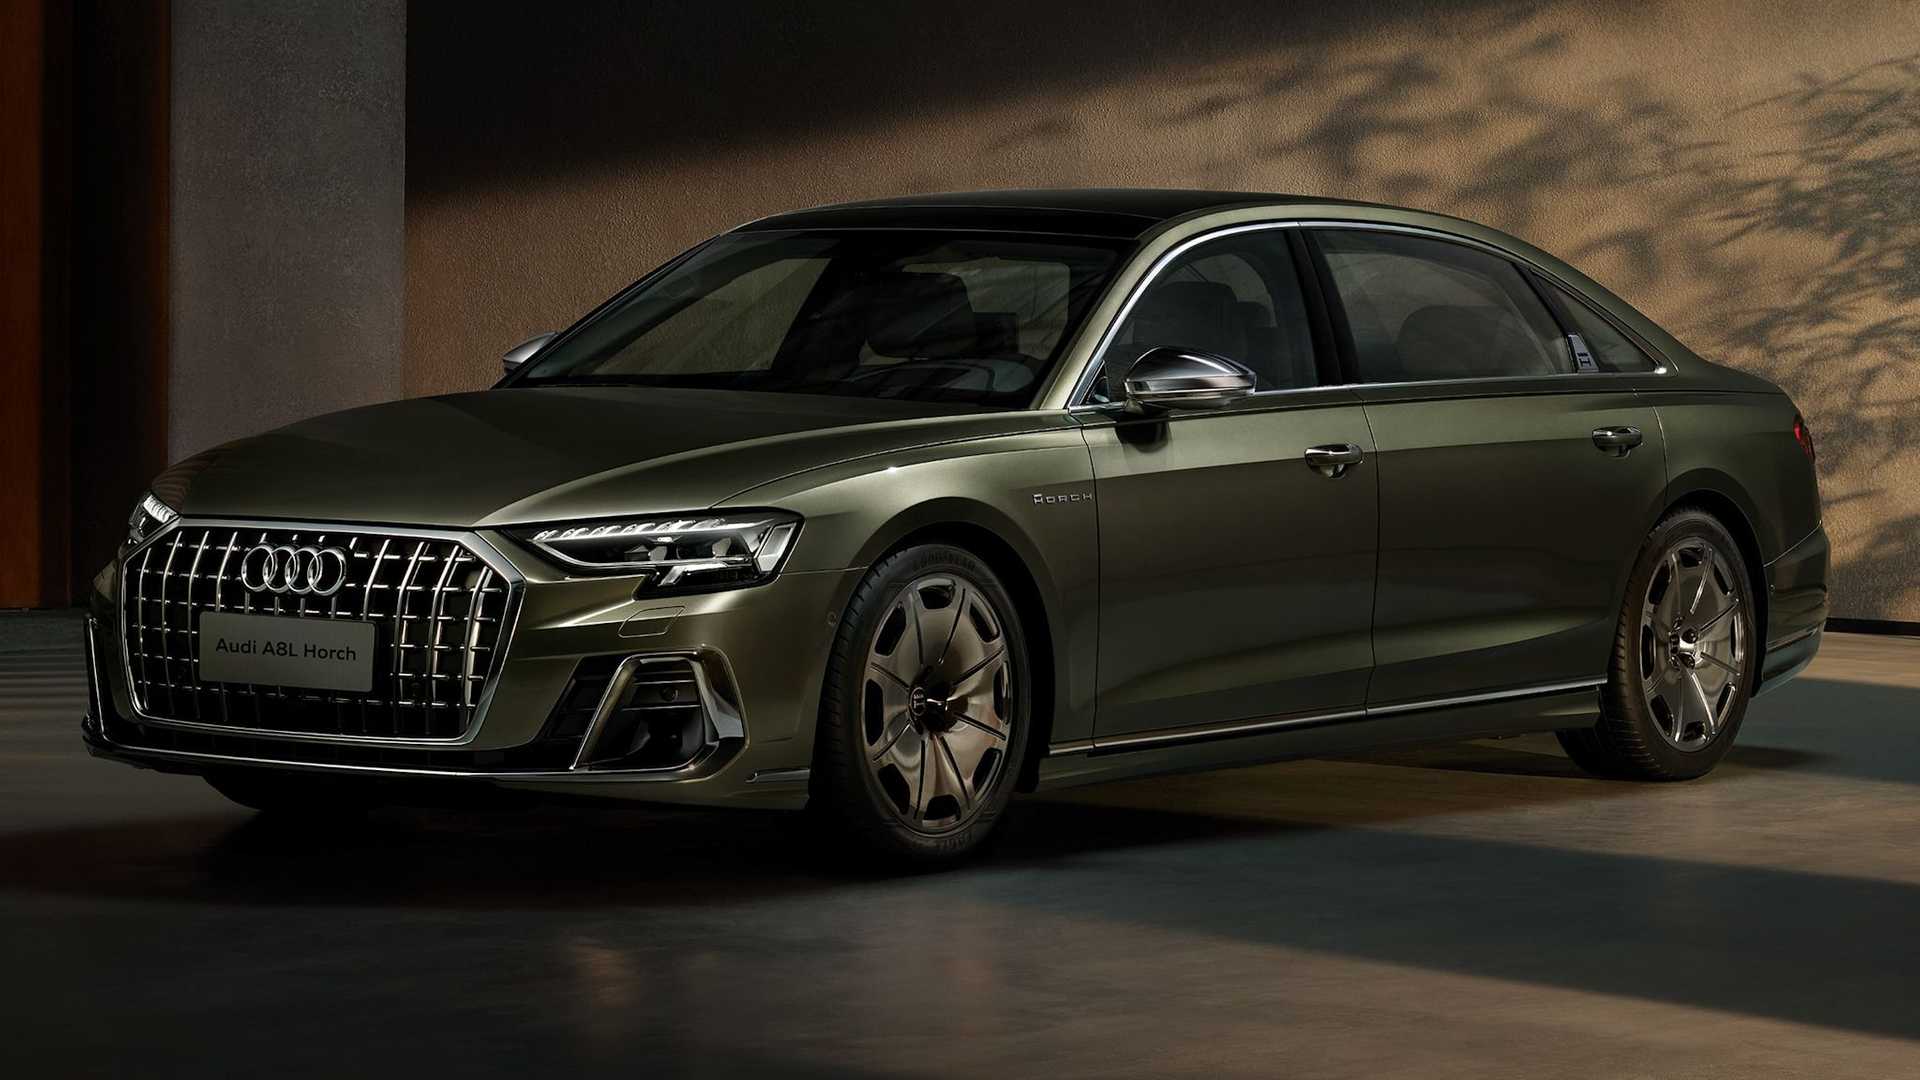 Audi A8 L Horch Breaks Cover Ahead Of Chinese Debut Next Month